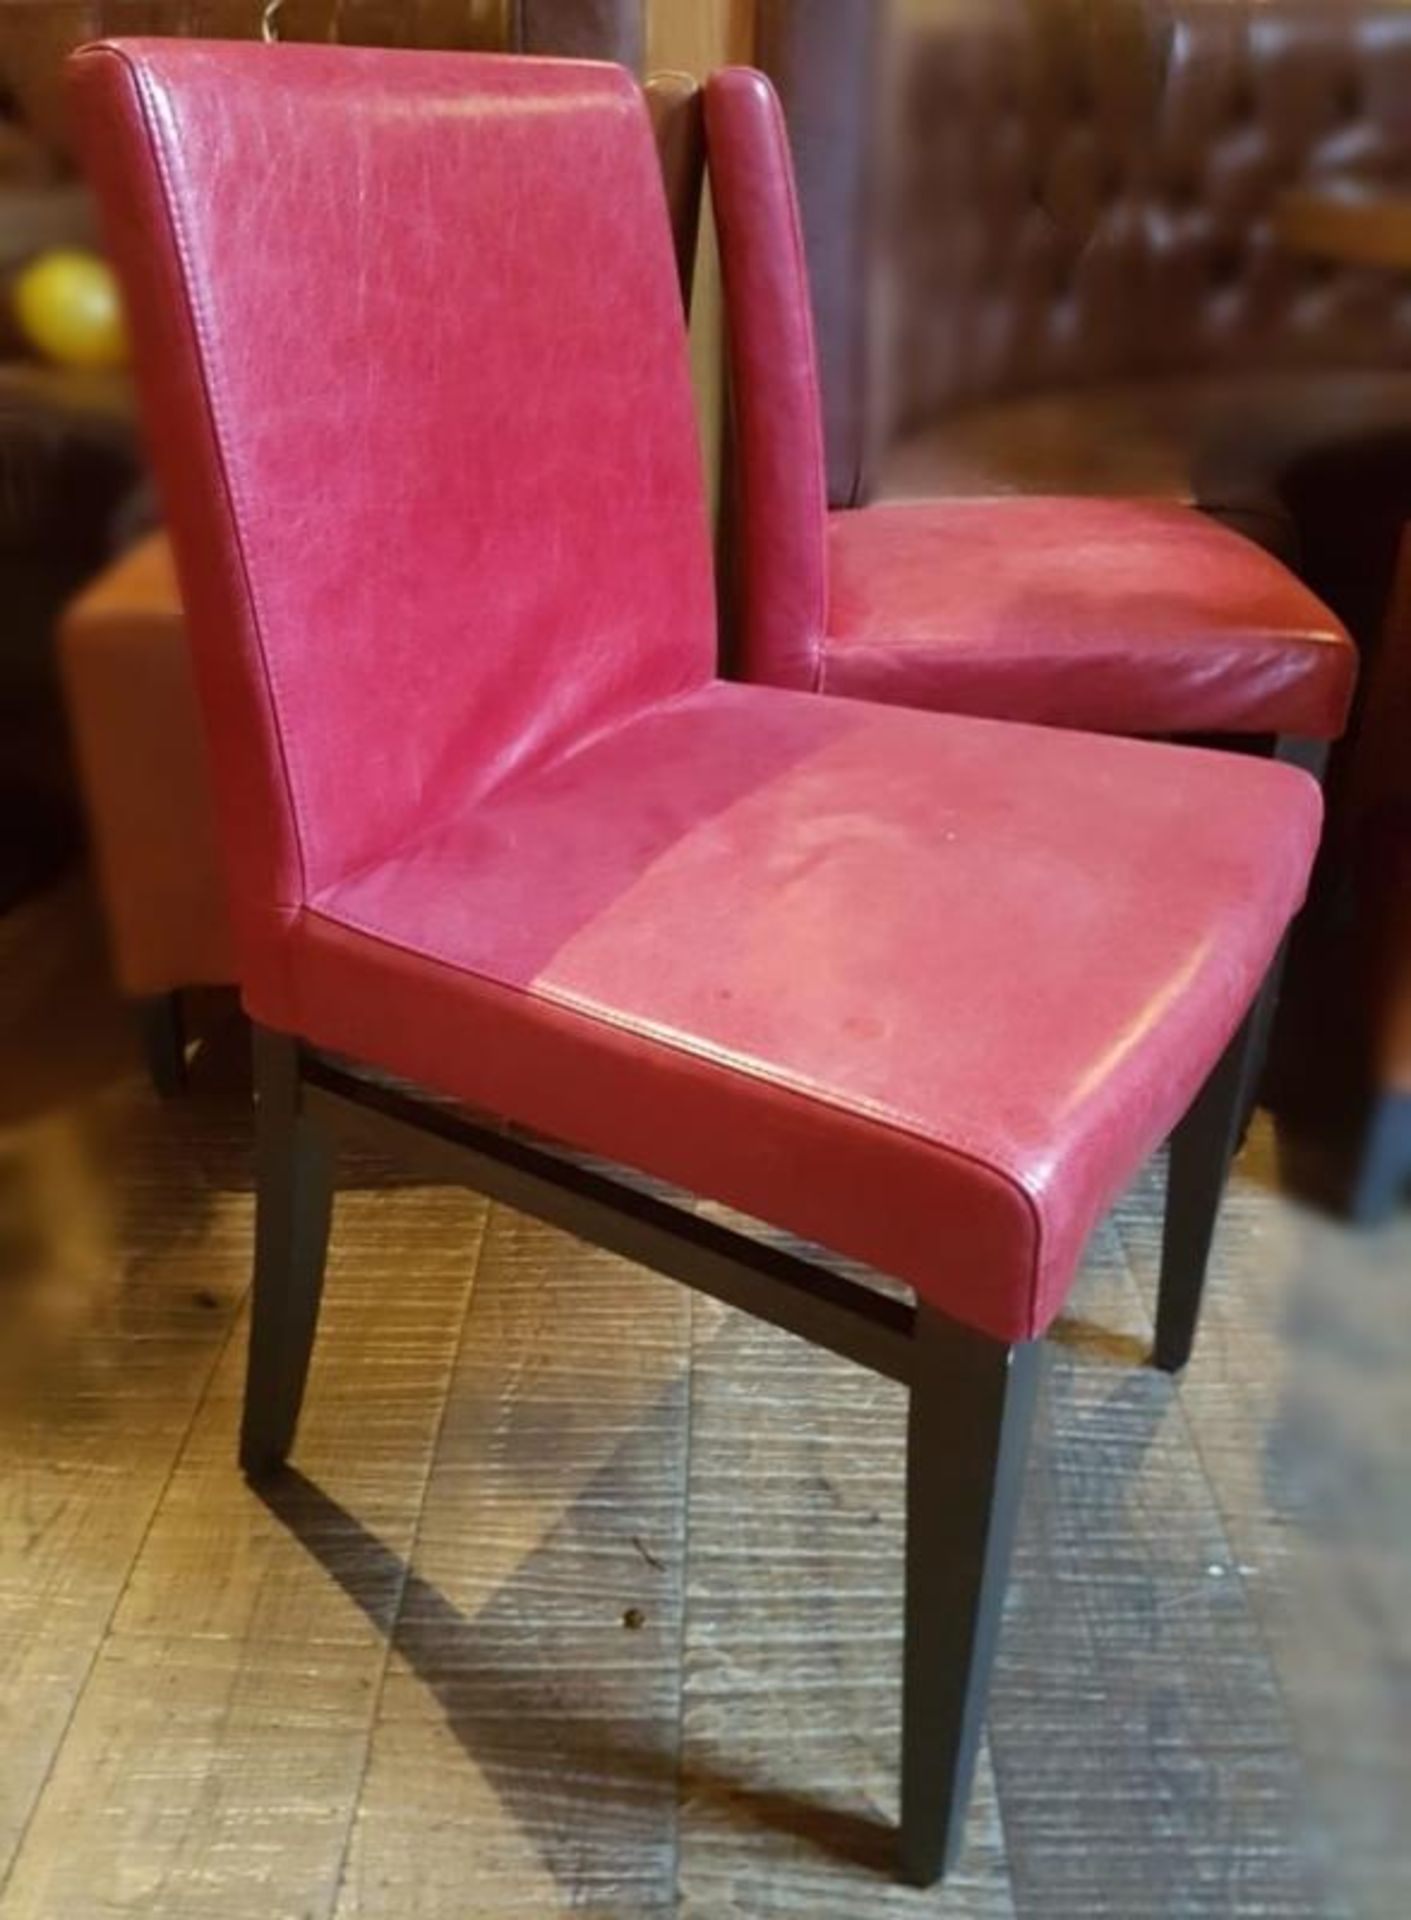 3 x Hard-wearing Red Leather Upholstered Commercial Dining Chairs - Recently Removed From A City Cen - Image 2 of 3